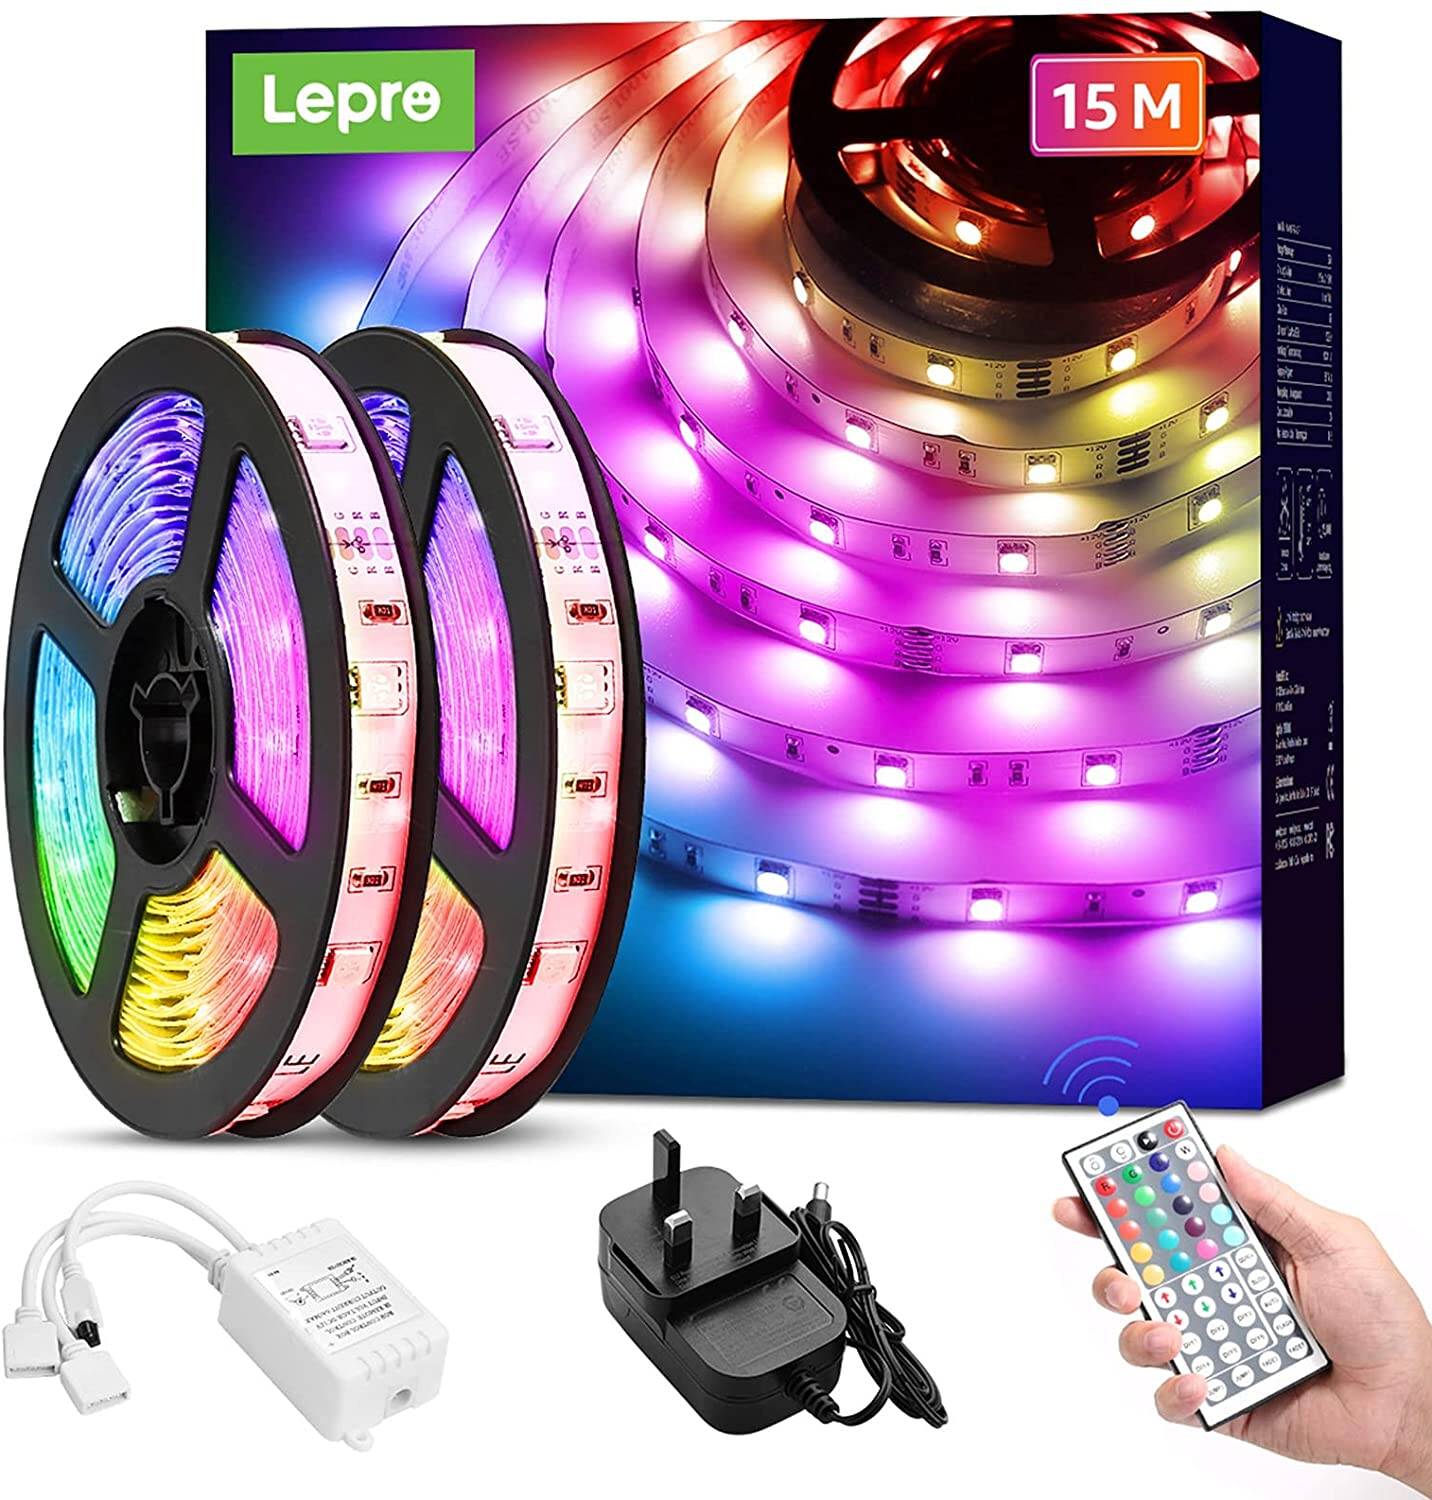 Lepro LED Strip Lights 15M with Remote and Plug, RGB Colour Changing LED  Strips, Dimmable Strip Lighting, Stick on LED Lights for Bedroom Ceiling Party  Decoration (2 x 7.5M Kit, 450 Bright 5050 LEDs)